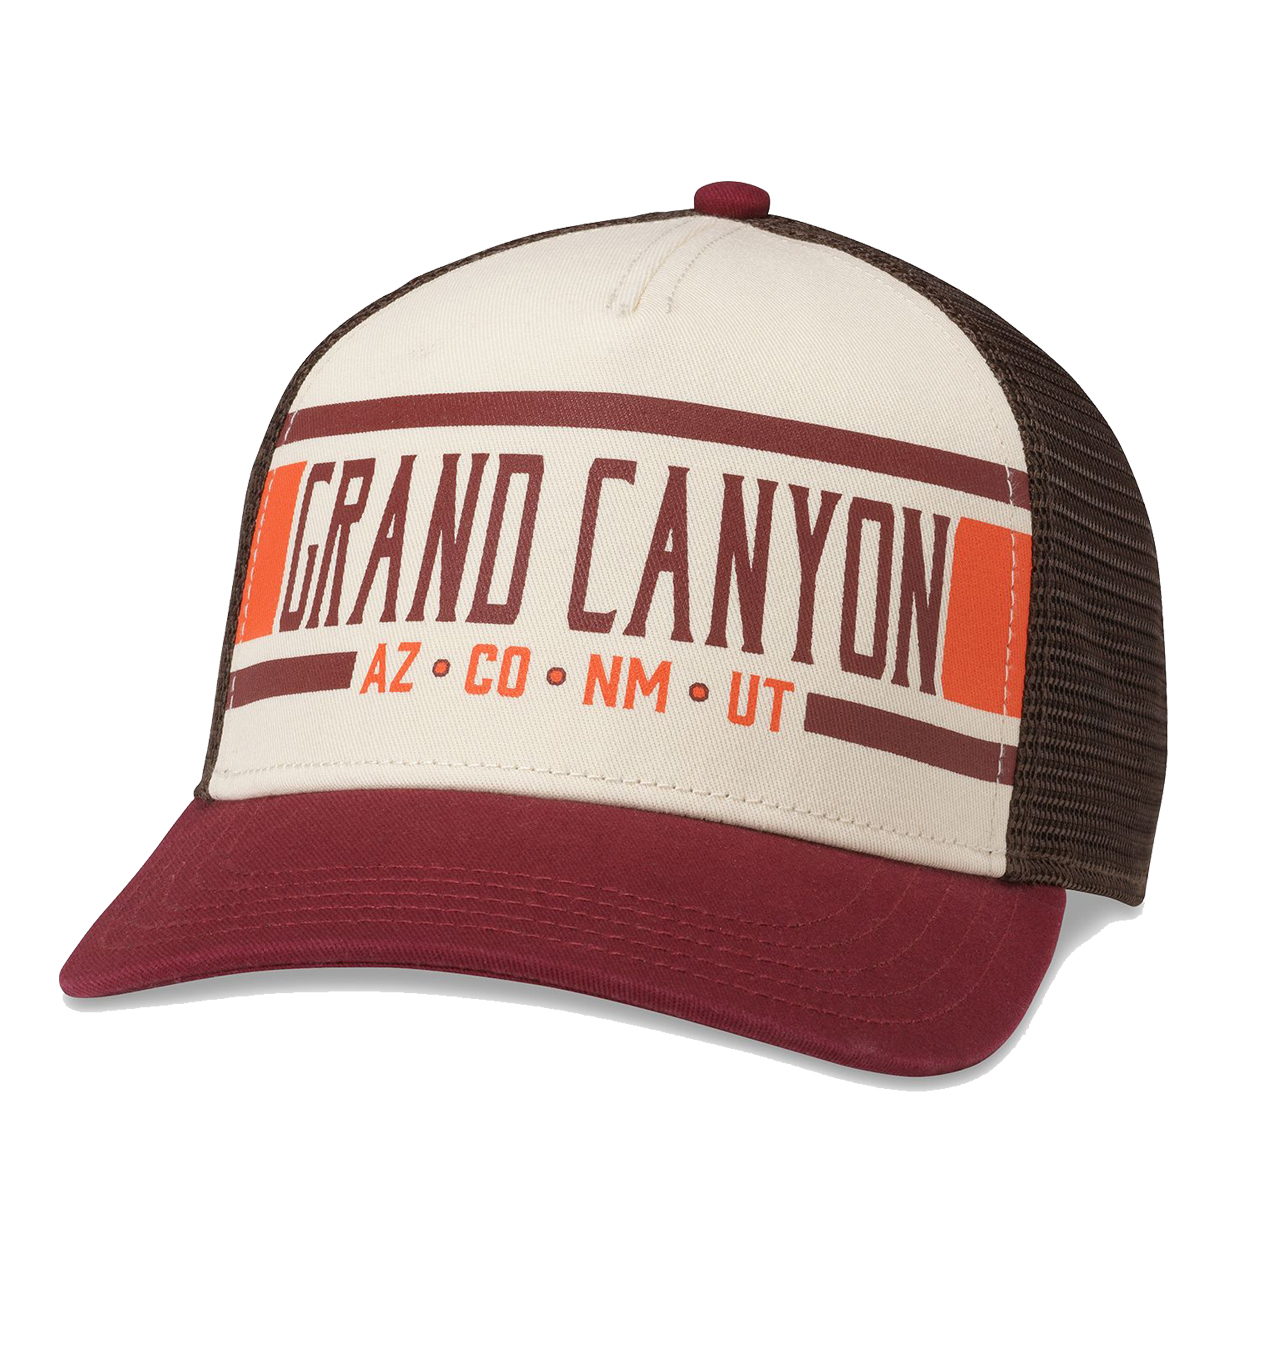 American Needle - Grand Canyon NP Sinclair - Brown/Ivory/Maroon